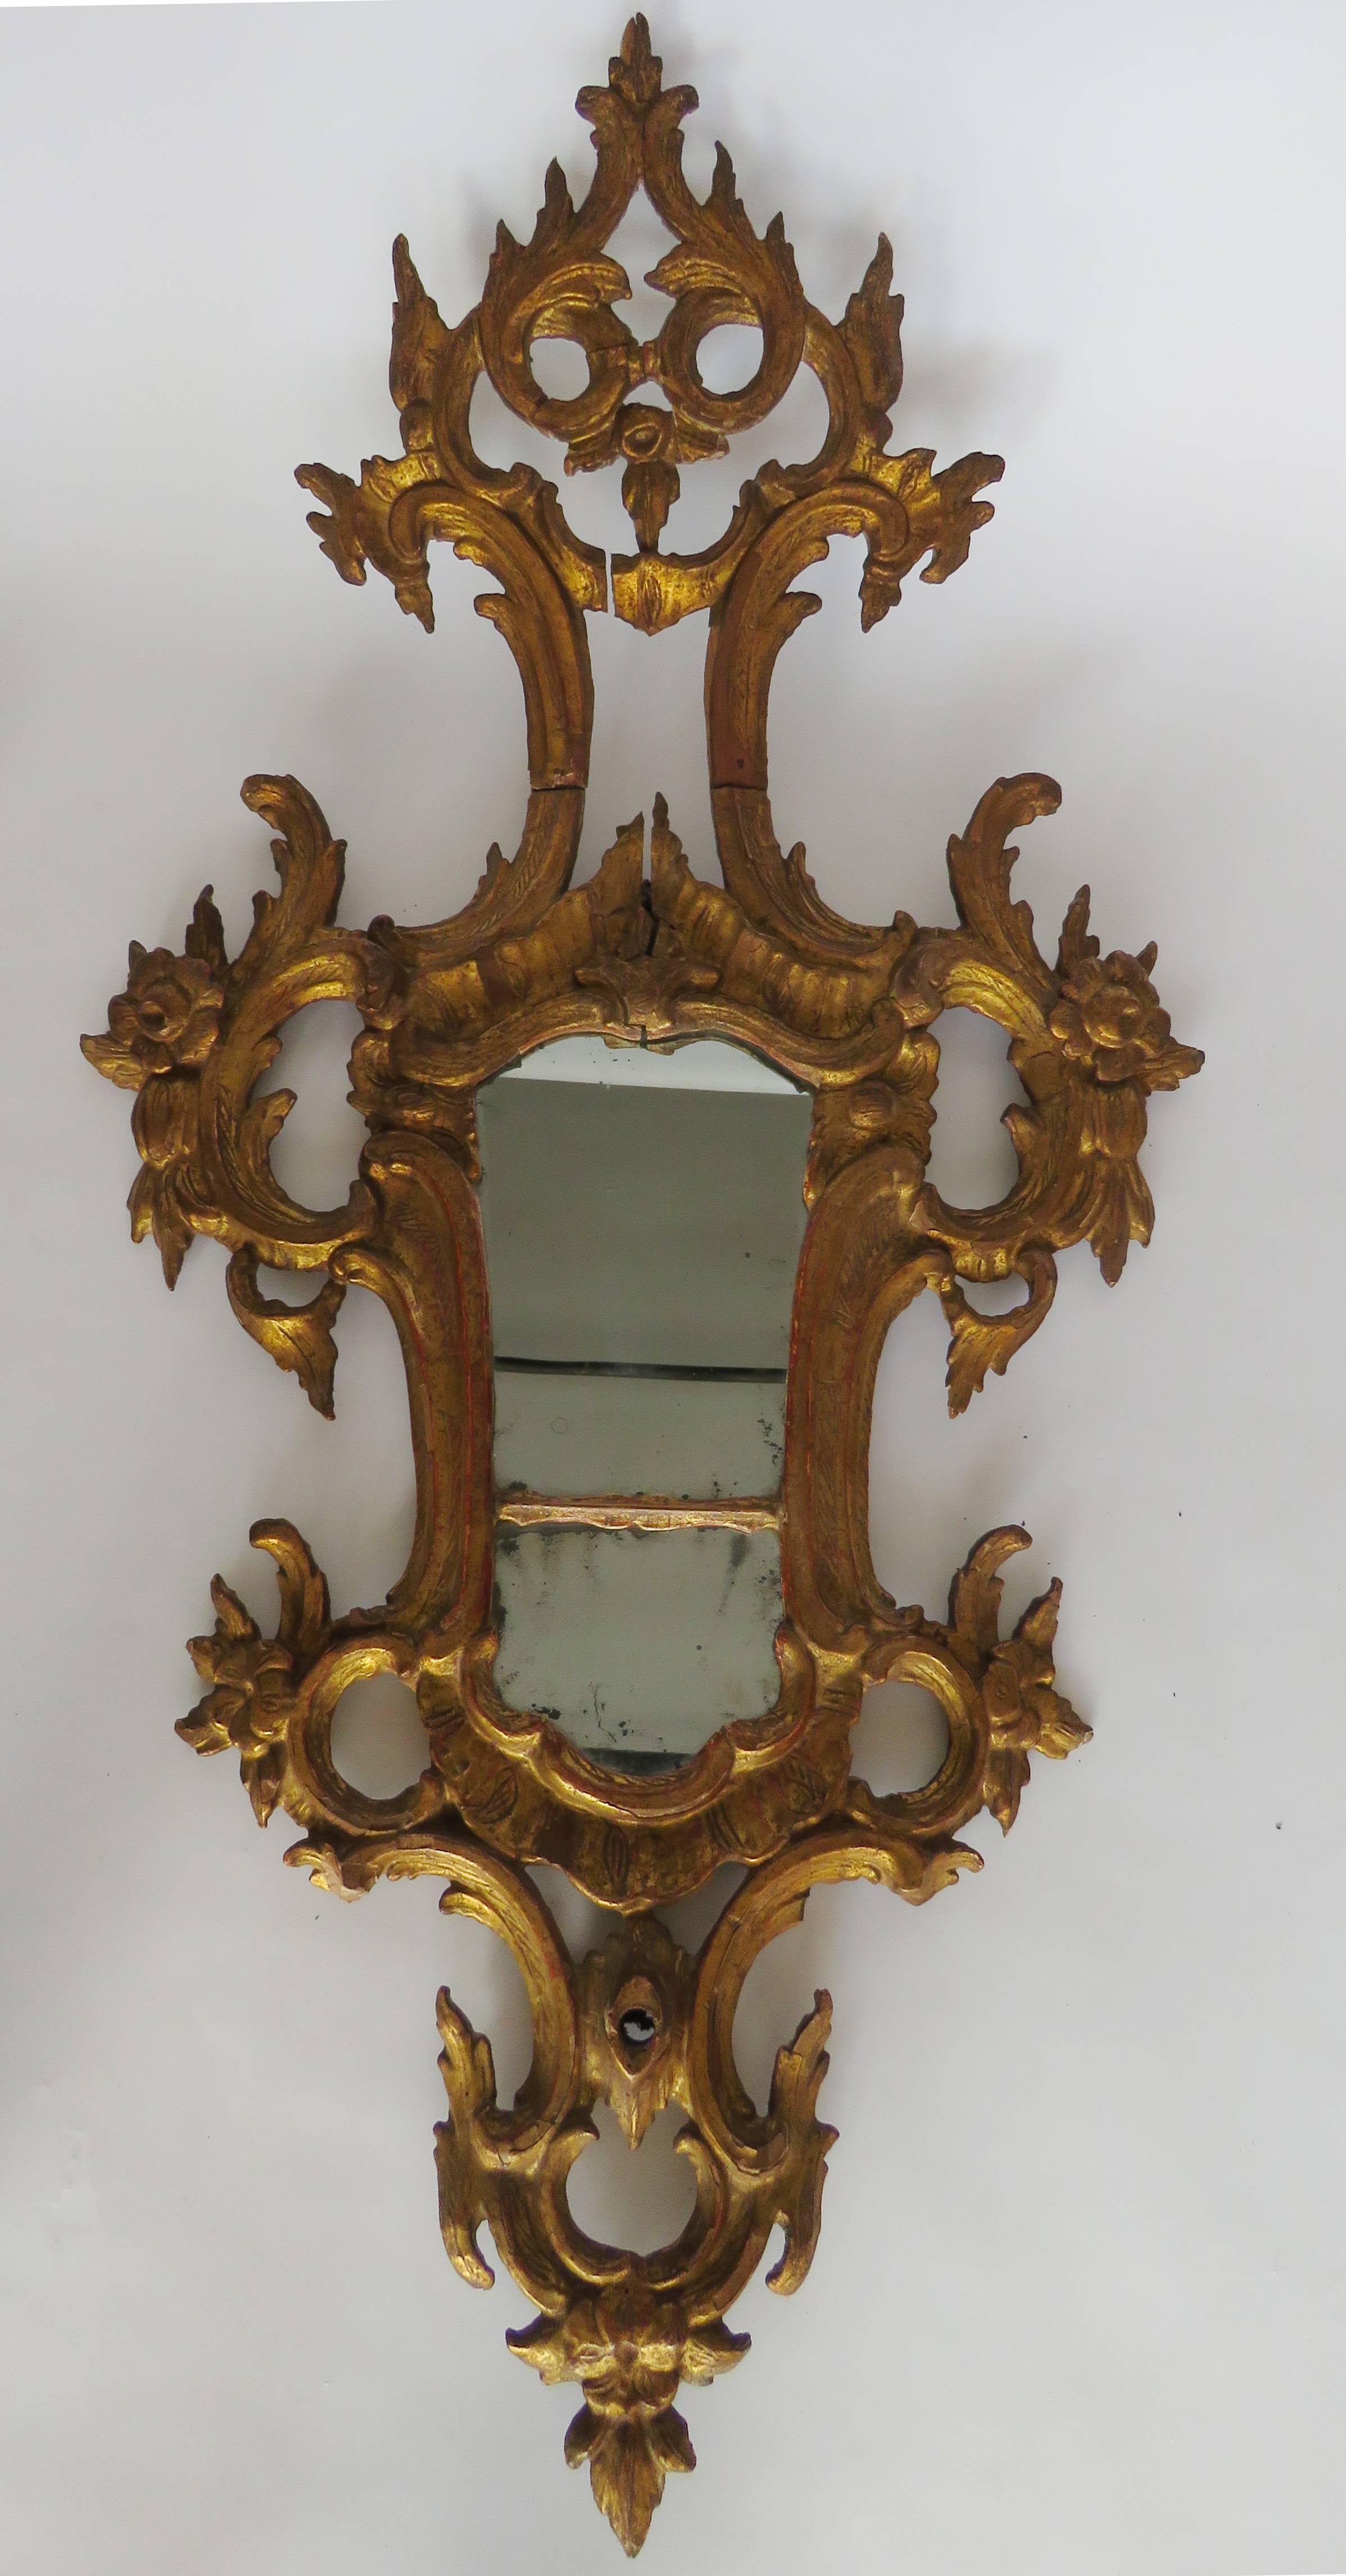 Each with cartouche shaped plate framed with gilt scrolling foliate vines surmounted by angled elongated plumed crests. Everything original.